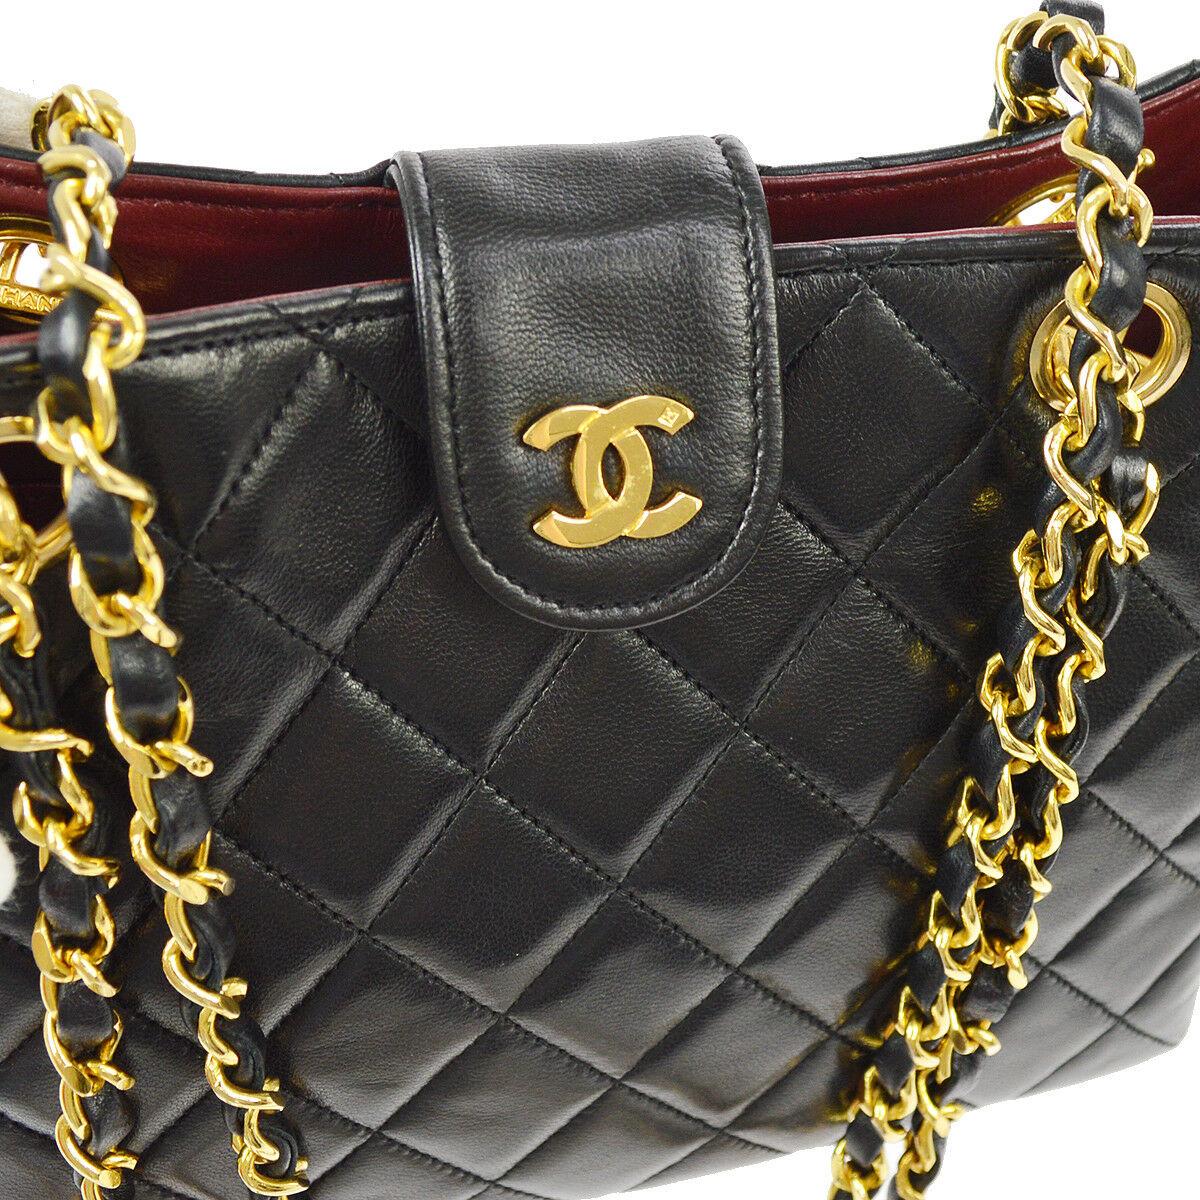 Chanel Black Leather Gold Small Carryall Shoulder Shopper Tote Bag

Leather
Gold tone hardware
Leather lining
Date code present
Made in France
Shoulder strap drop 14.5